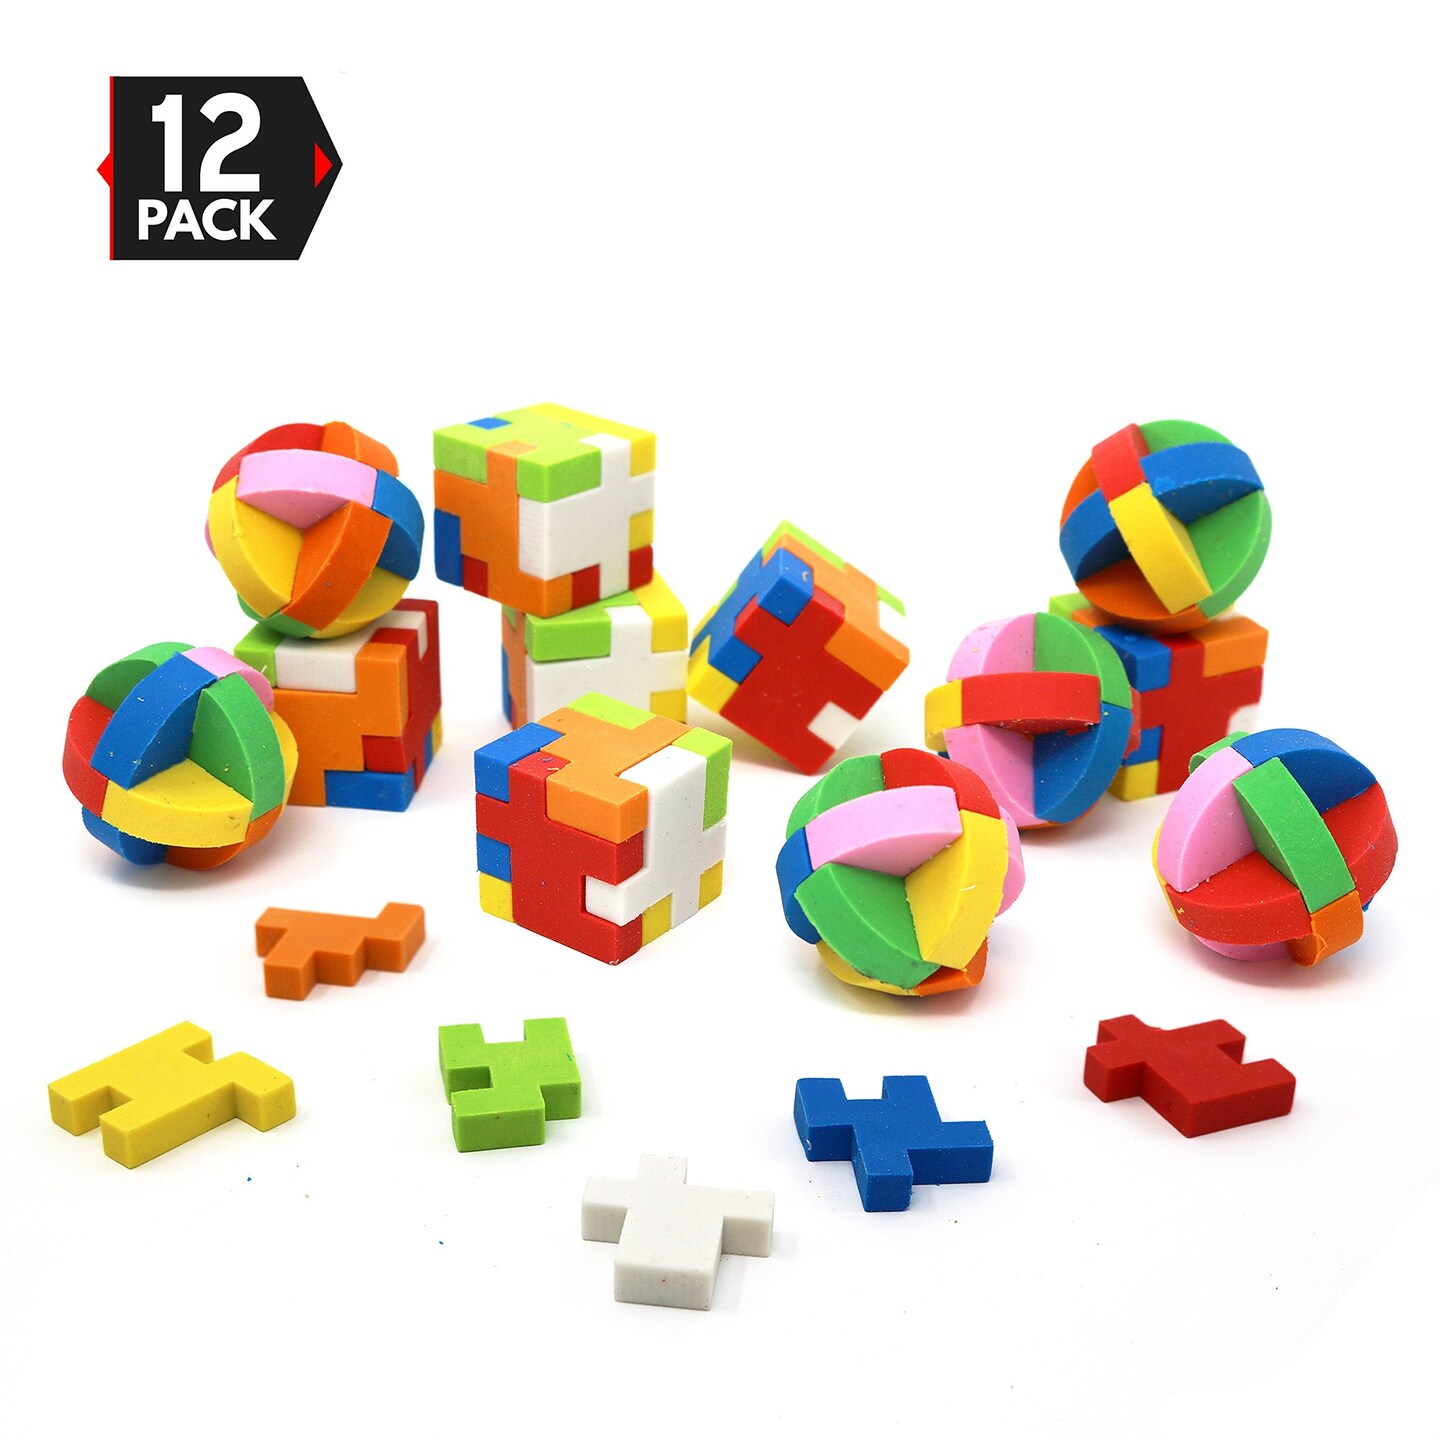 Big Mo&#x27;s Toys Puzzle Erasers - Individually Wrapped Goody Bag Party Favor And Stocking Stuffers Pencil Eraser - 6 Balls And 6 Cubes